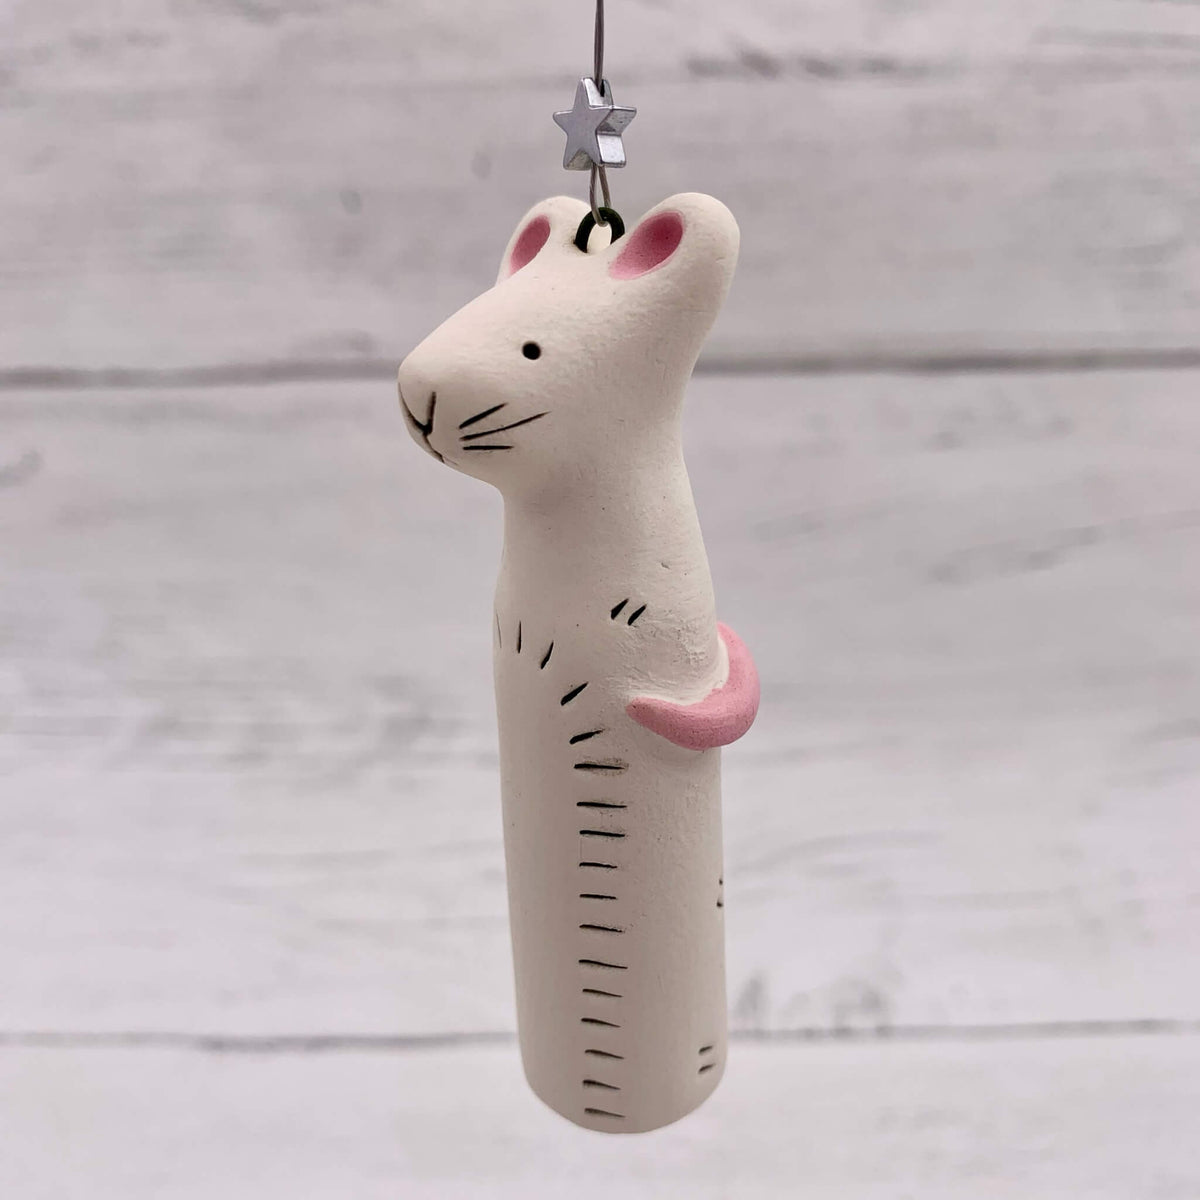 Handmade ceramic mouse hanging, with a silver star and pink tail.